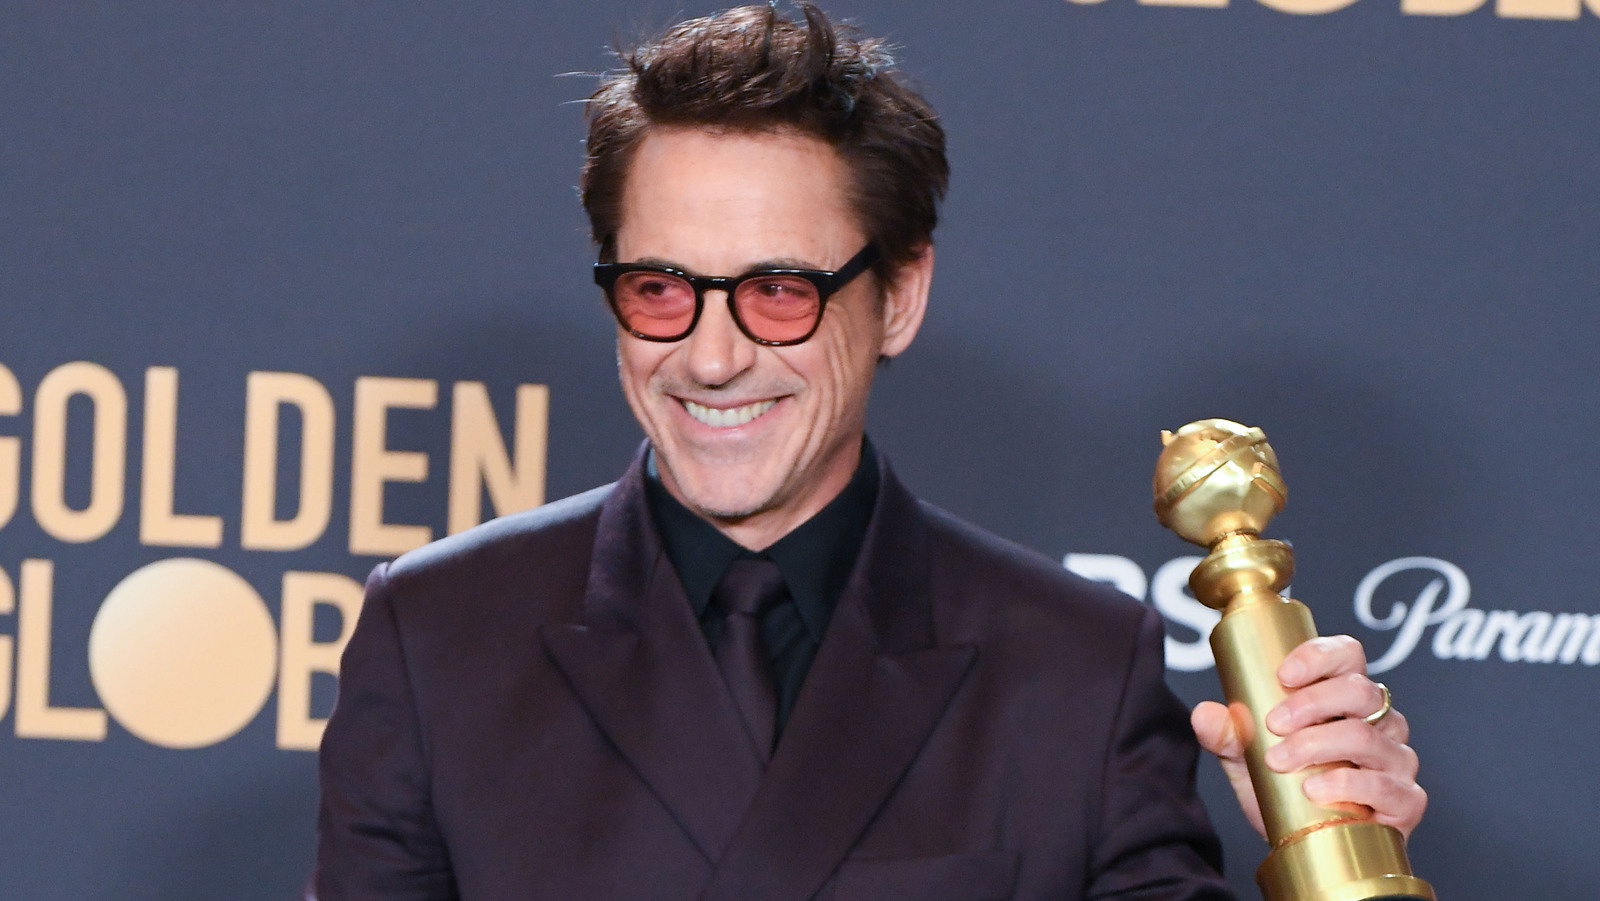 Robert Downey Jr. Said He Was On Beta Blockers During Golden Globes Speech. Here’s What They Are – Health Digest